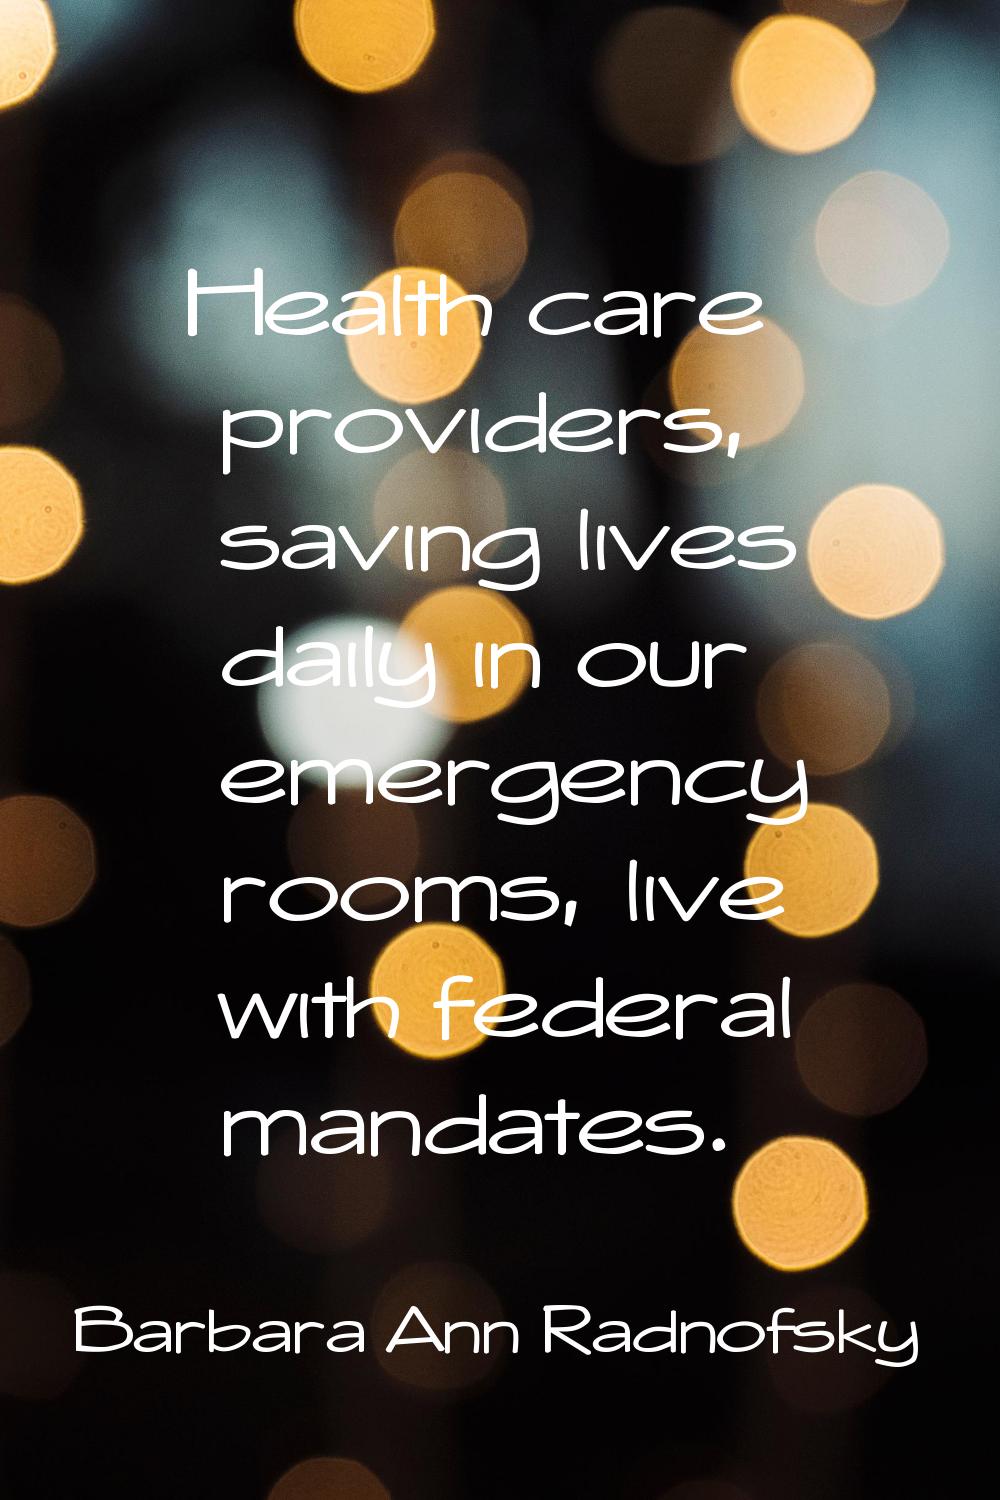 Health care providers, saving lives daily in our emergency rooms, live with federal mandates.